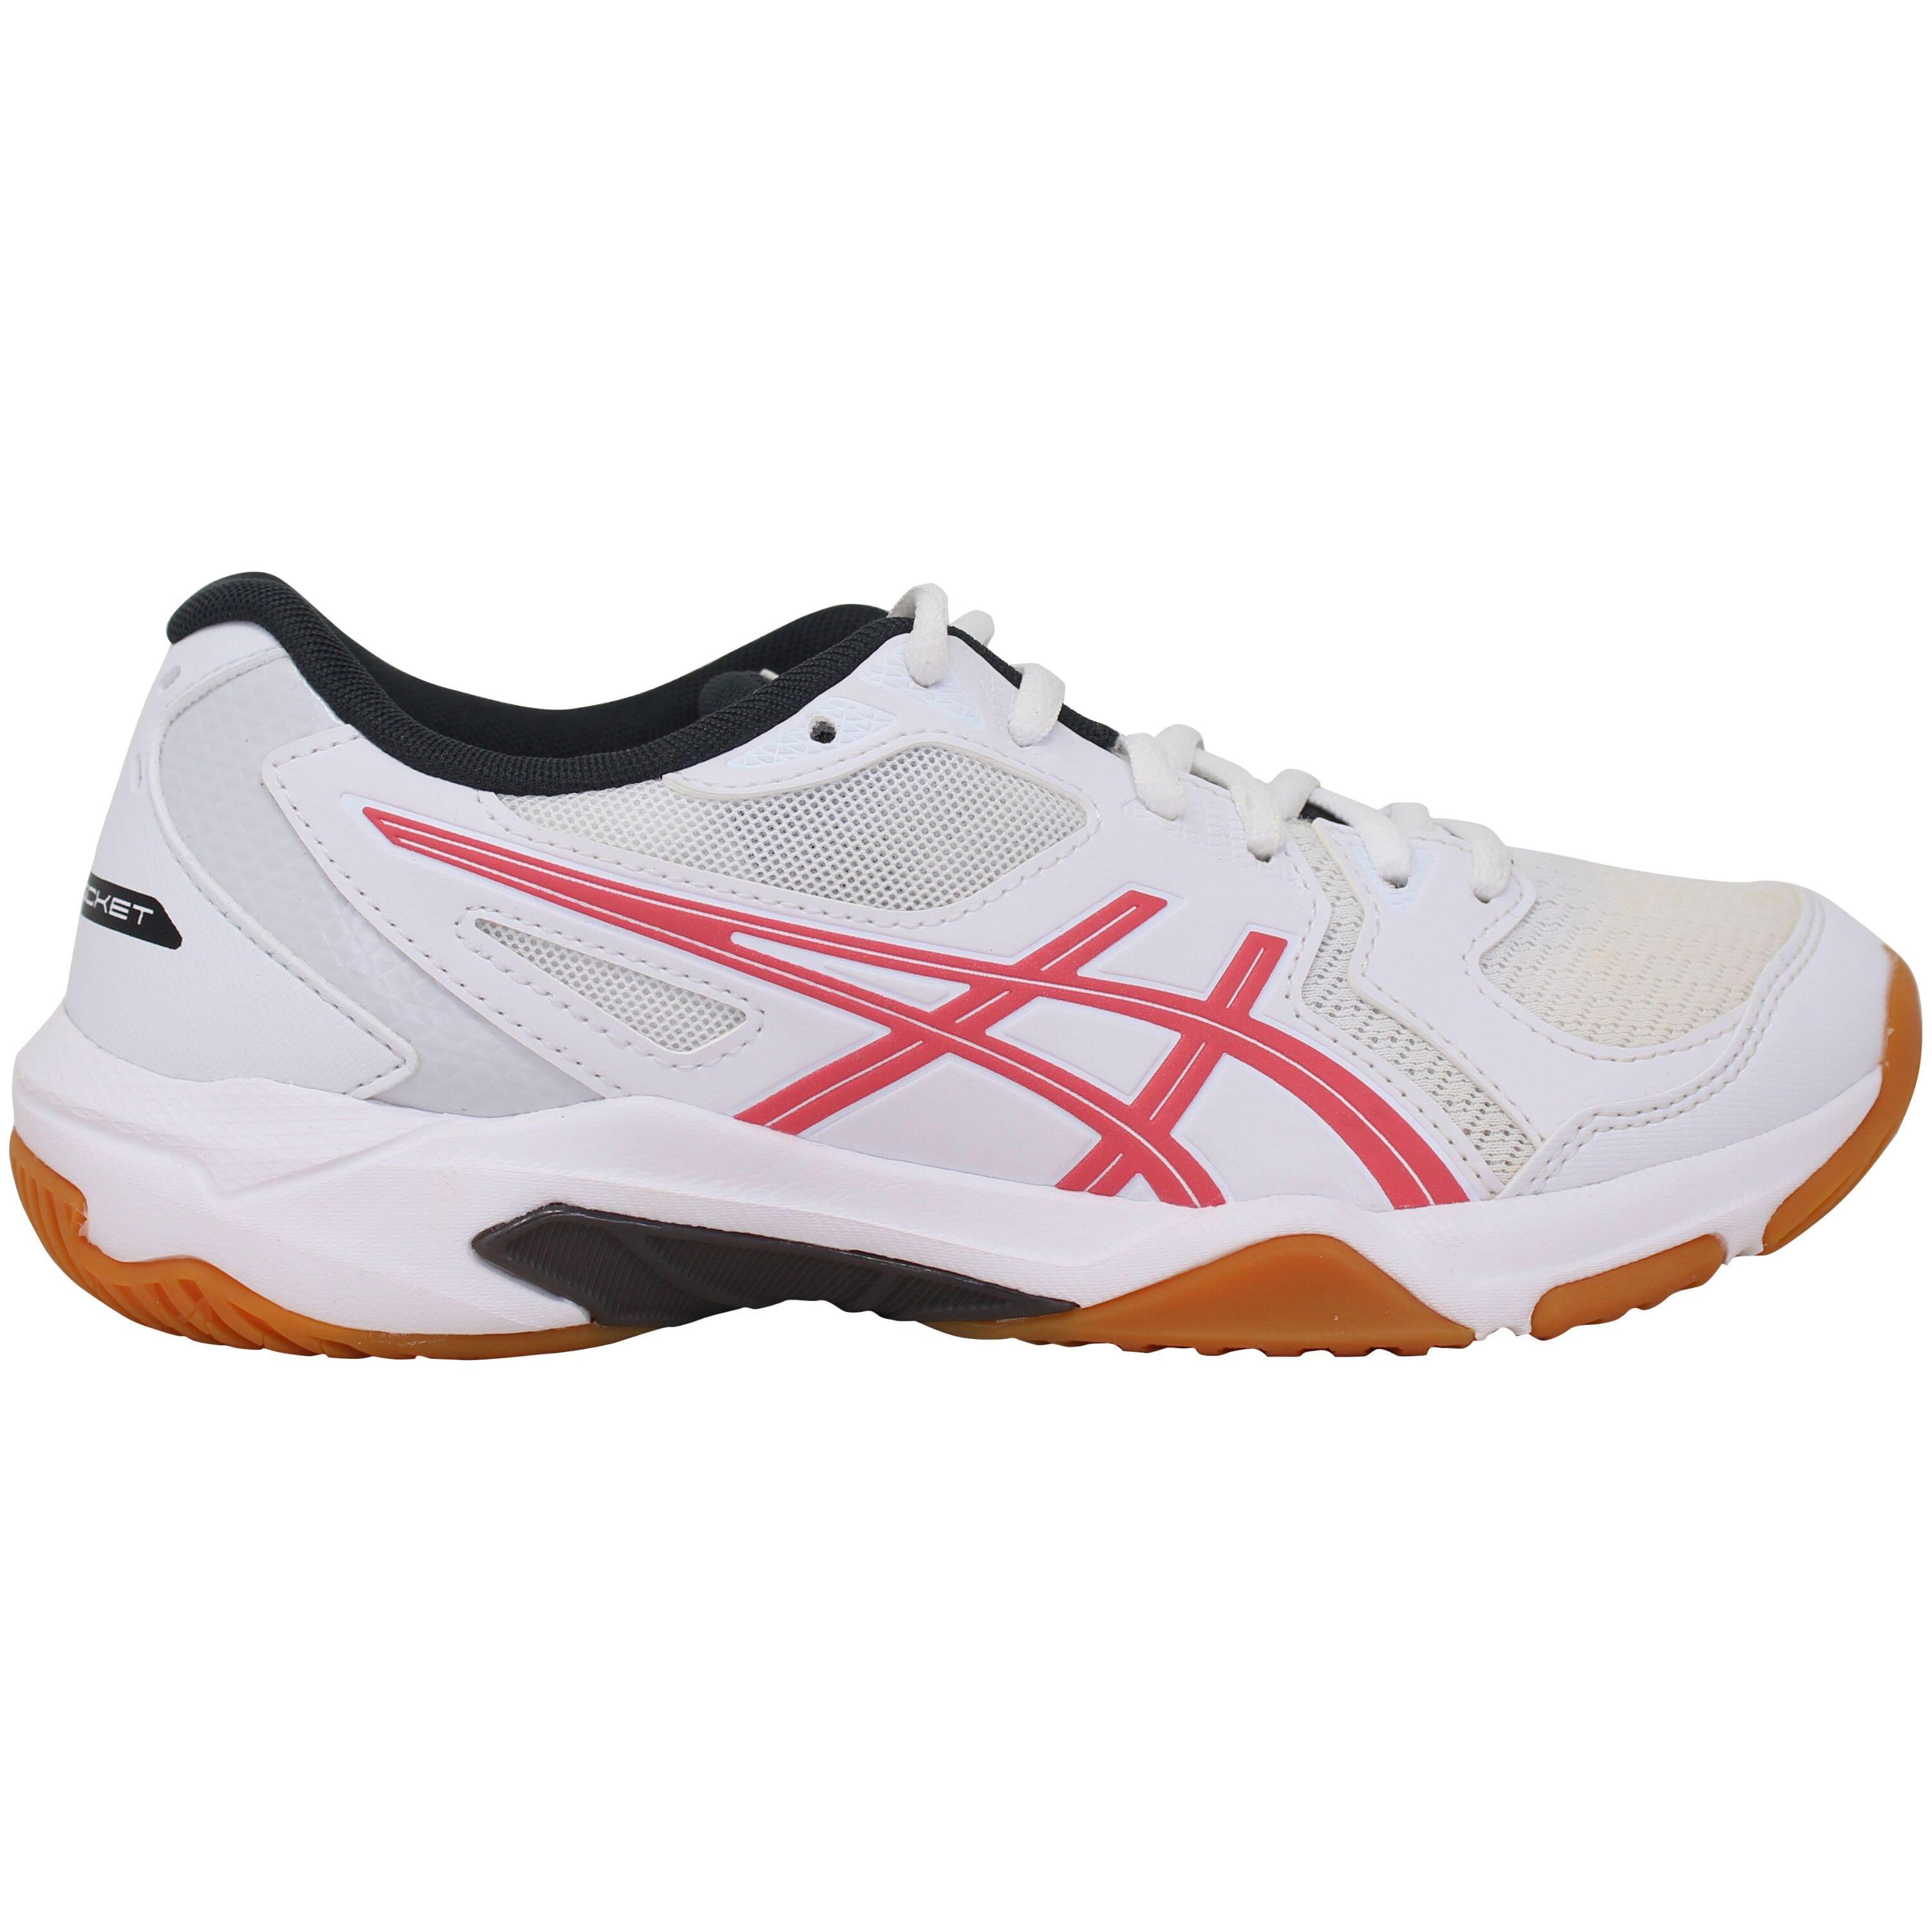 Asics Gel-rocket 10 White/pink Cameo 1072a056-108 | Lyst